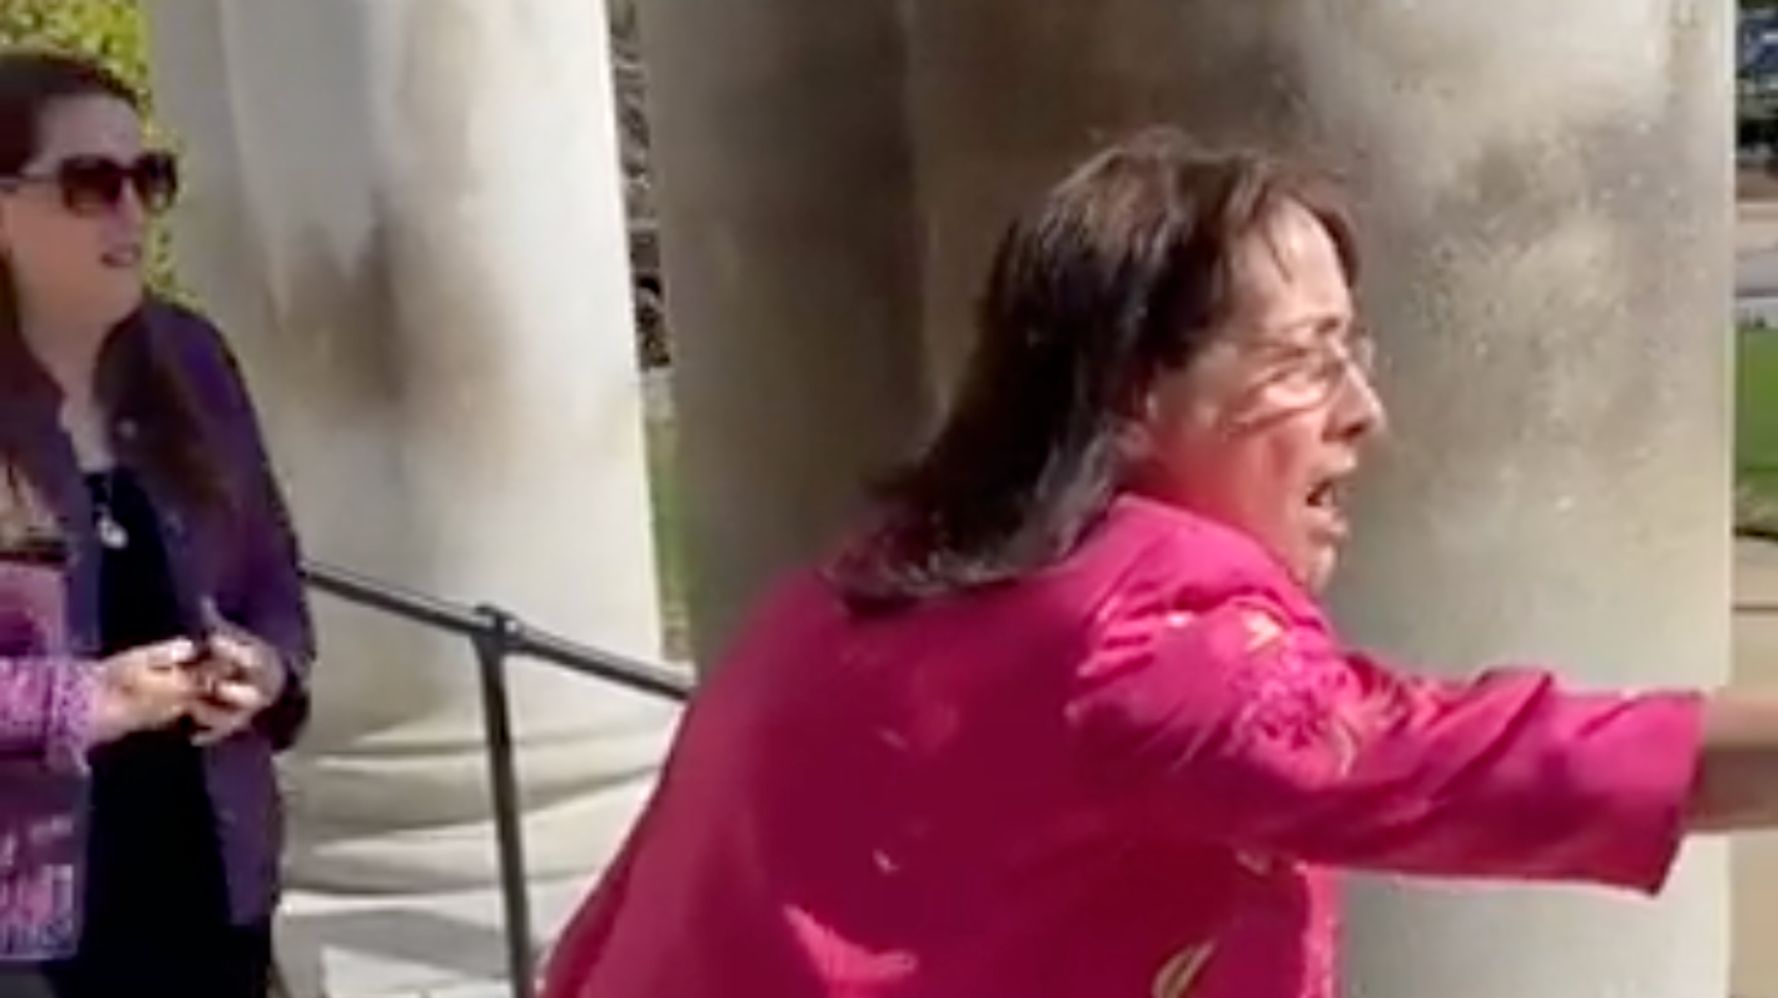 GOP State Rep. Filmed Repeatedly Screaming 'Murderers' At Pro-Choice Activists